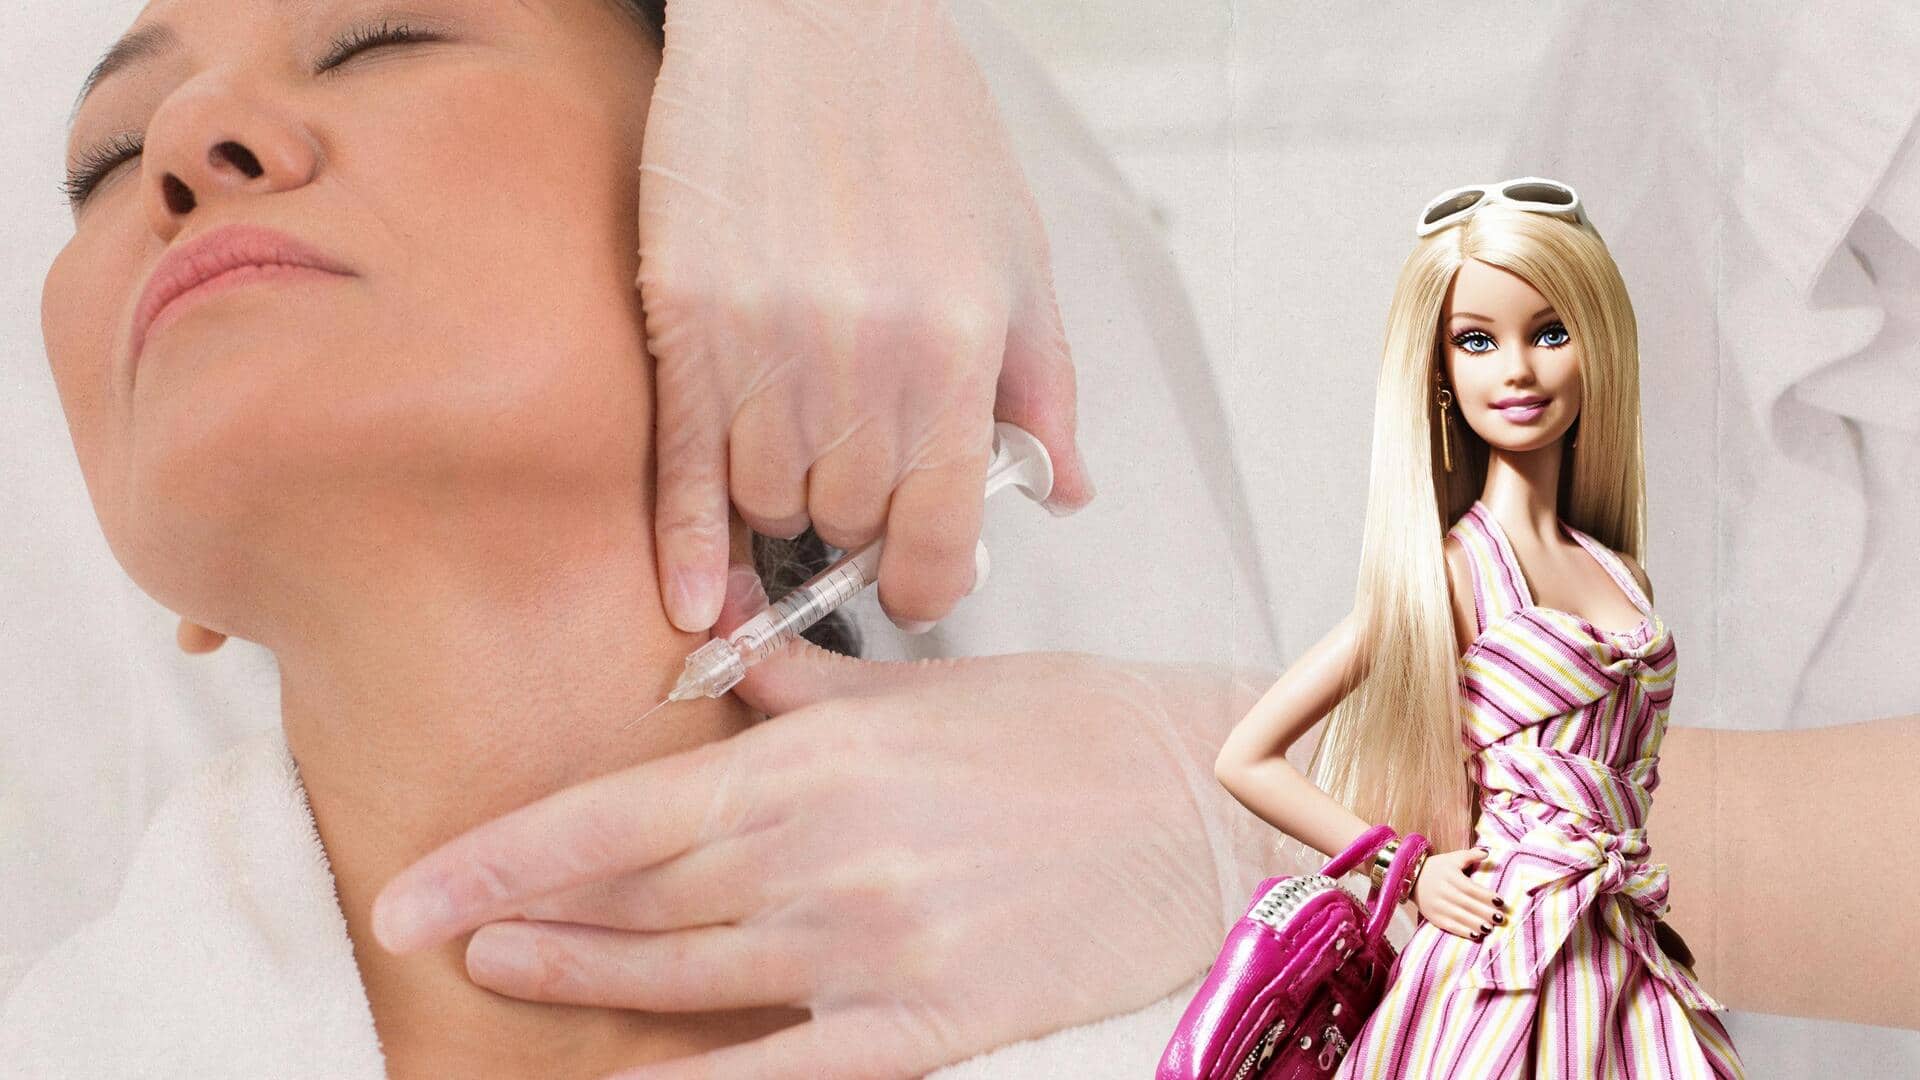 Barbie Botox: Here's everything about the latest viral cosmetic trend